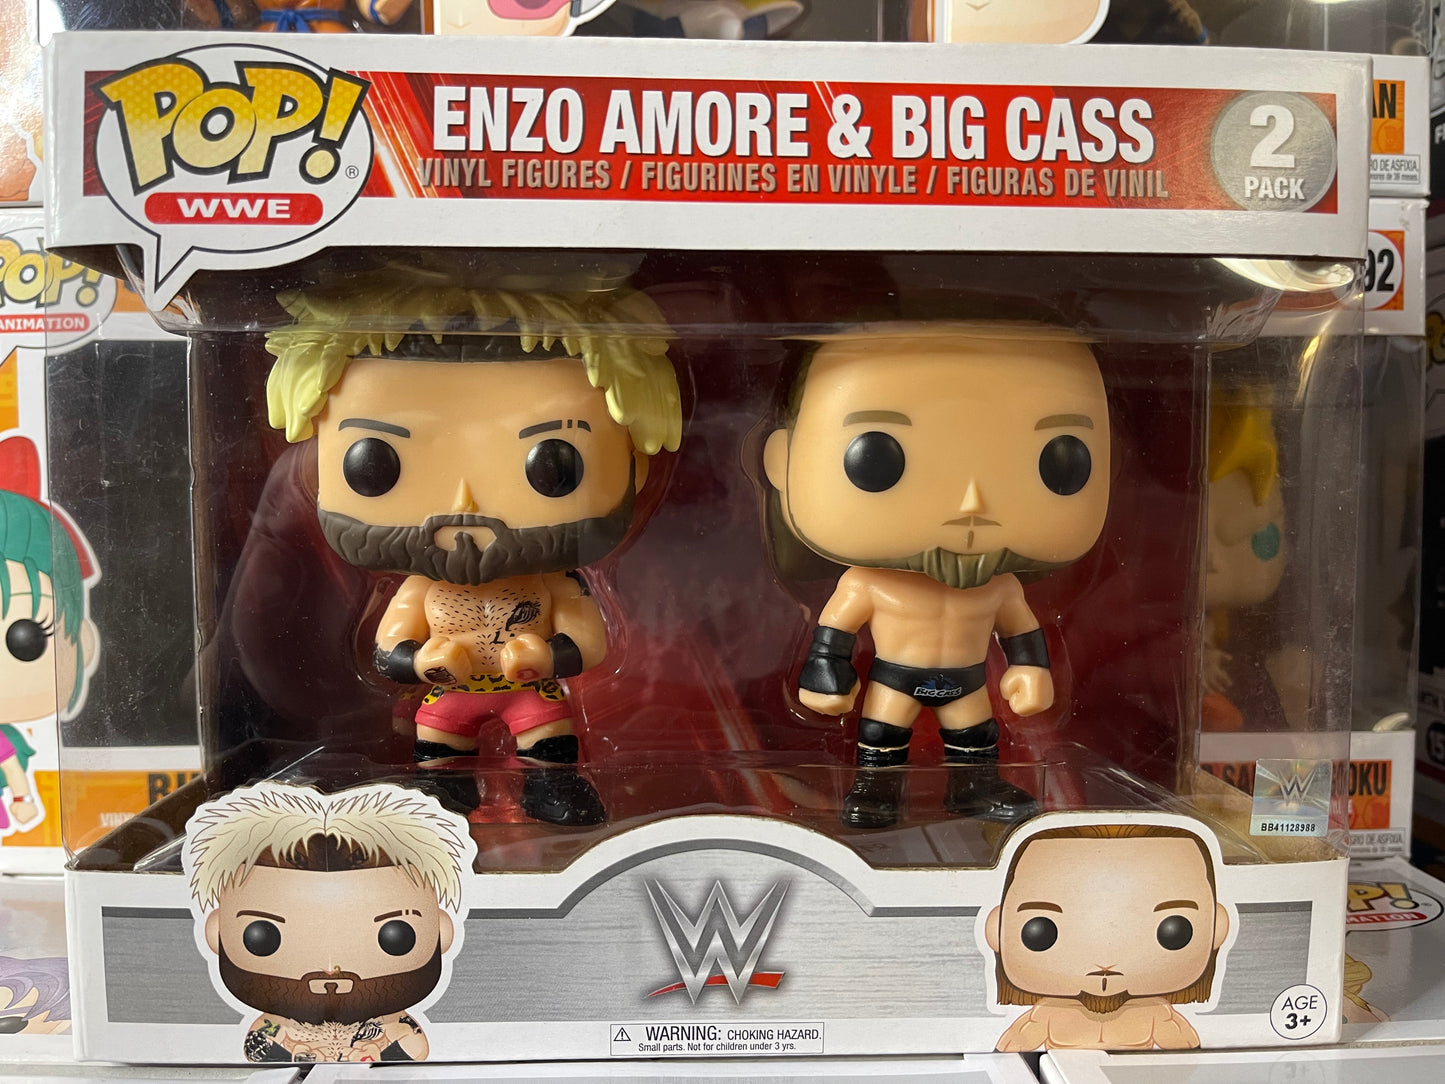 WWE - Enzo Amore & Big Cass (2-Pack) Vaulted